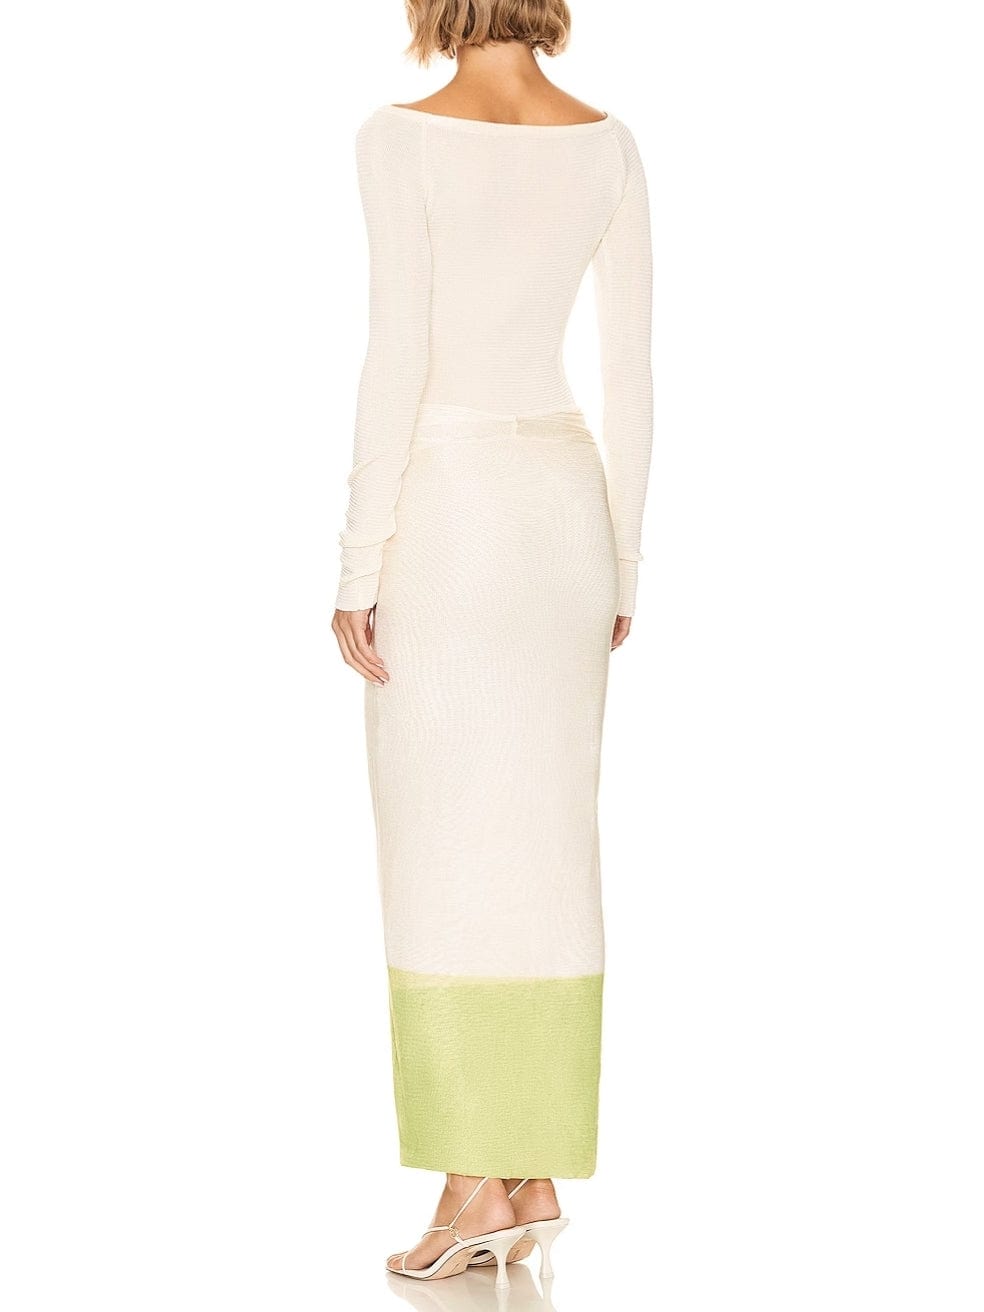 Amar Dress in White Lime